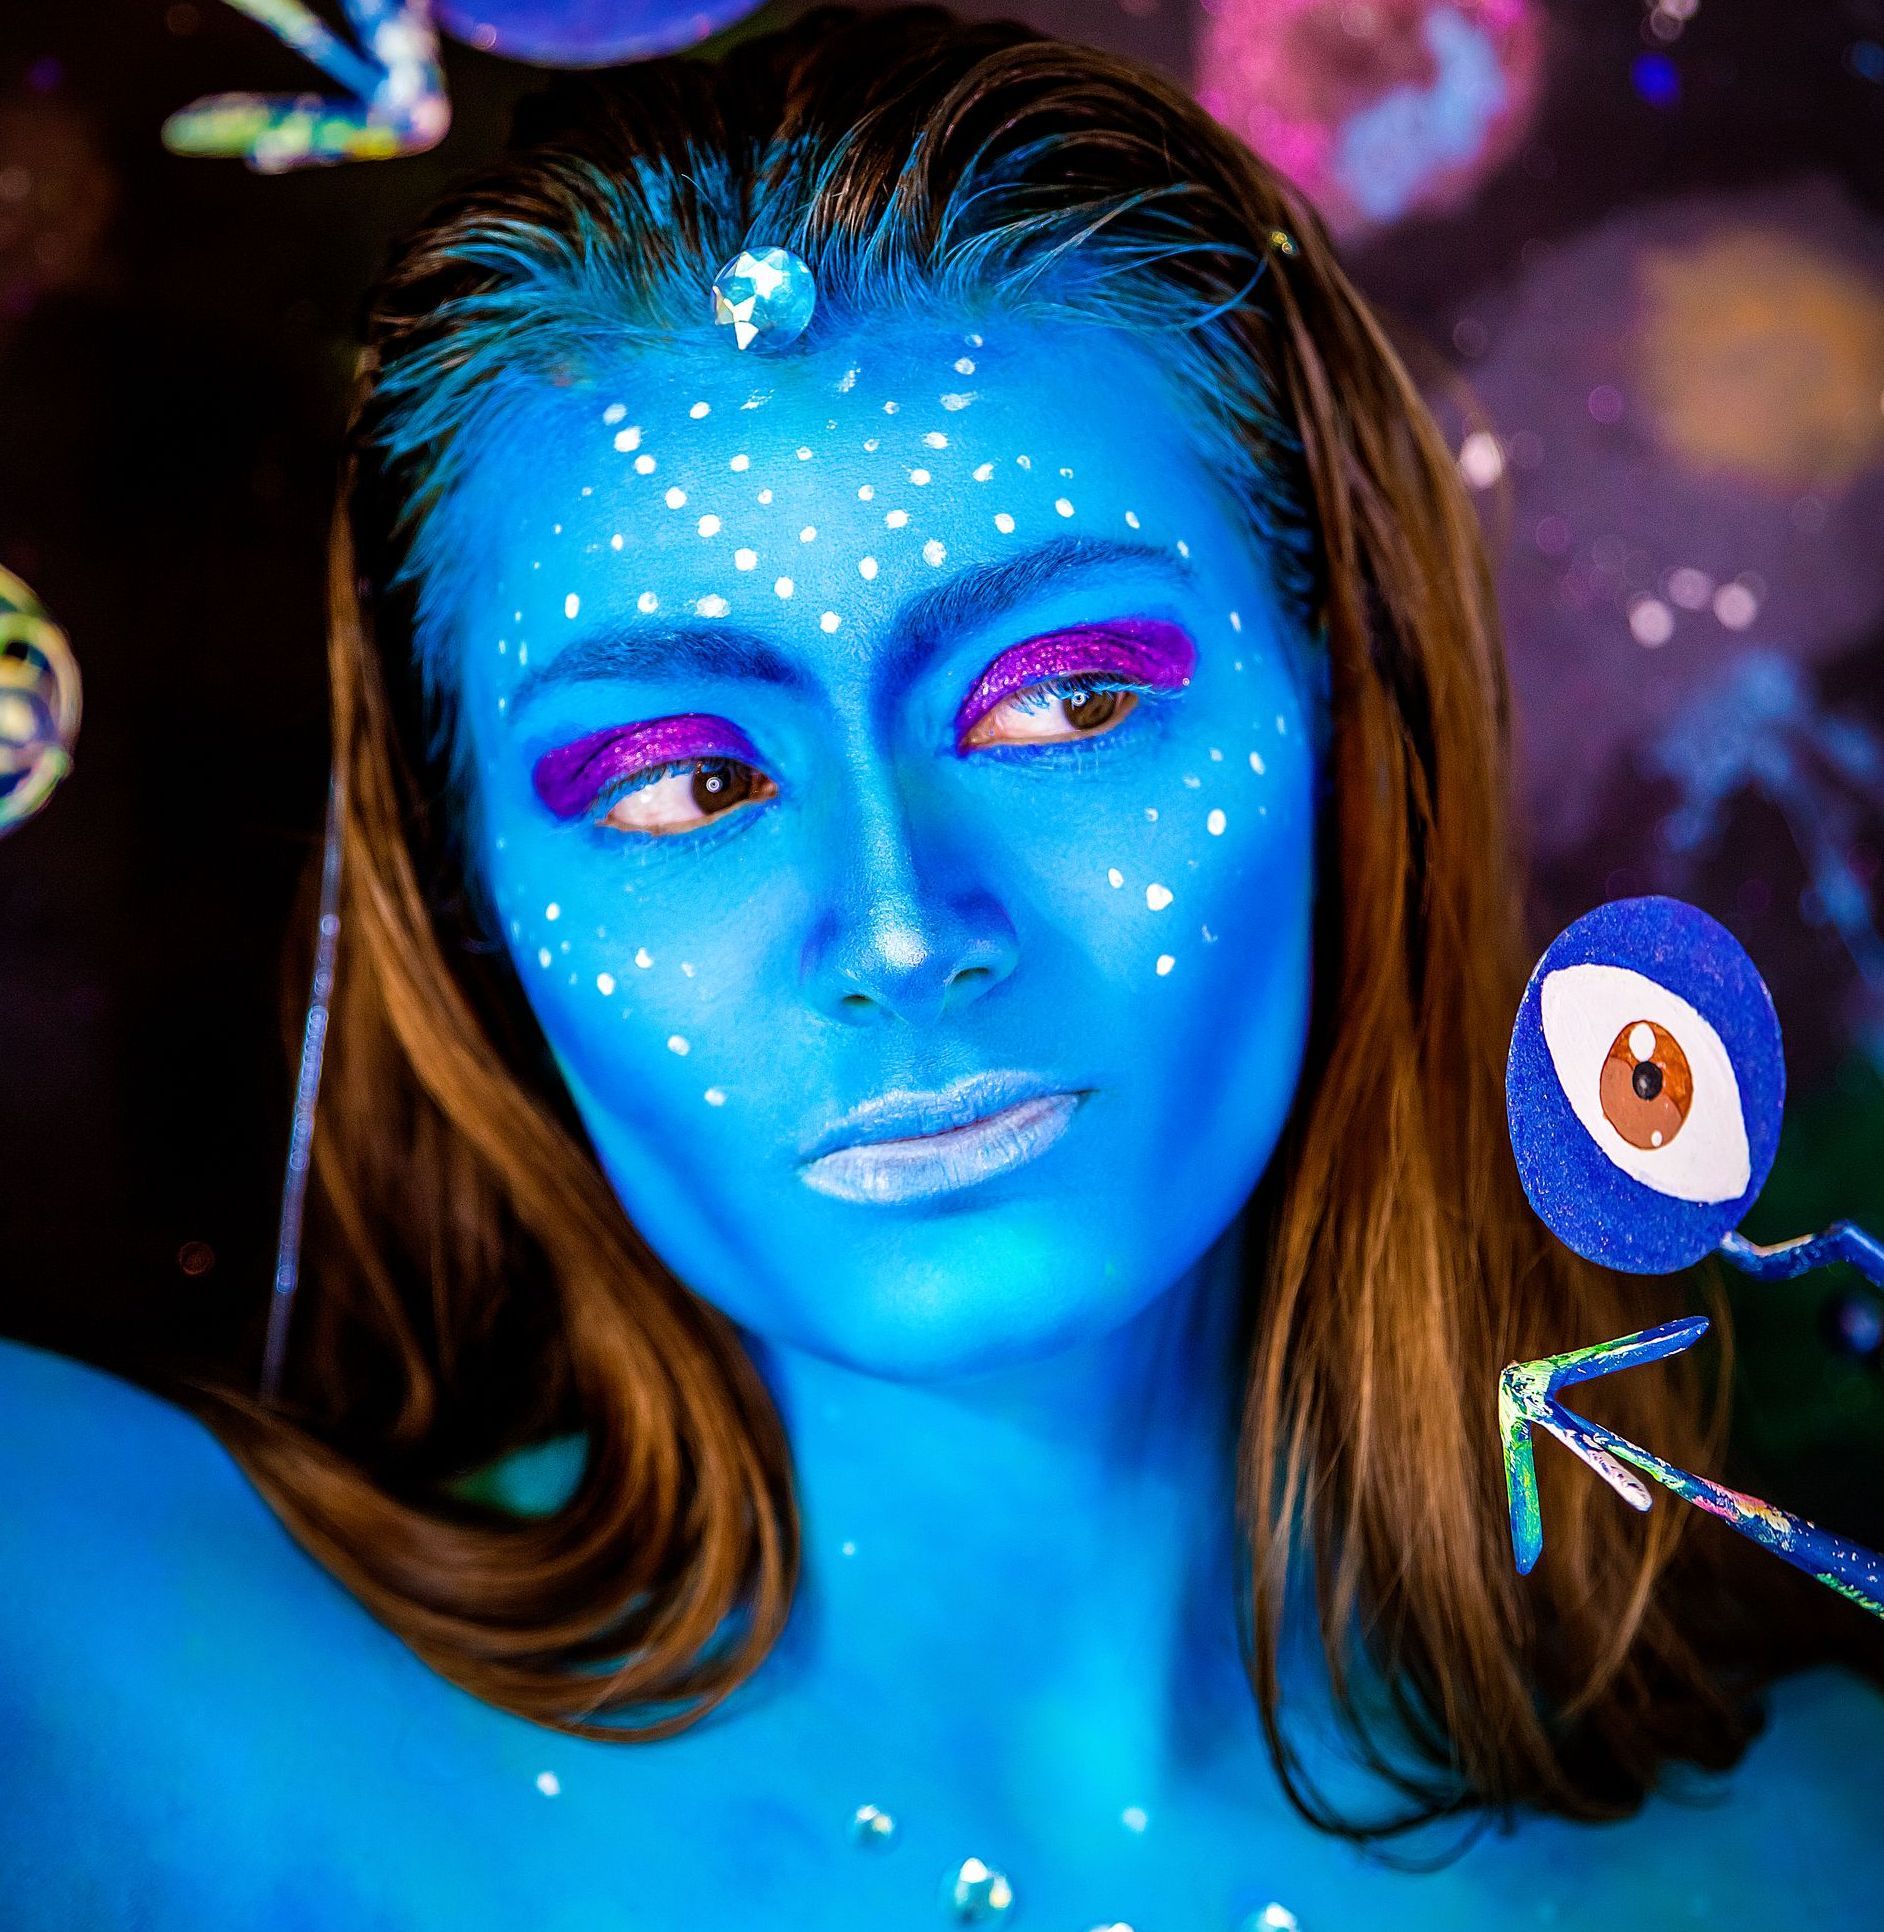 picture of woman with face painted like character from Avatar movie